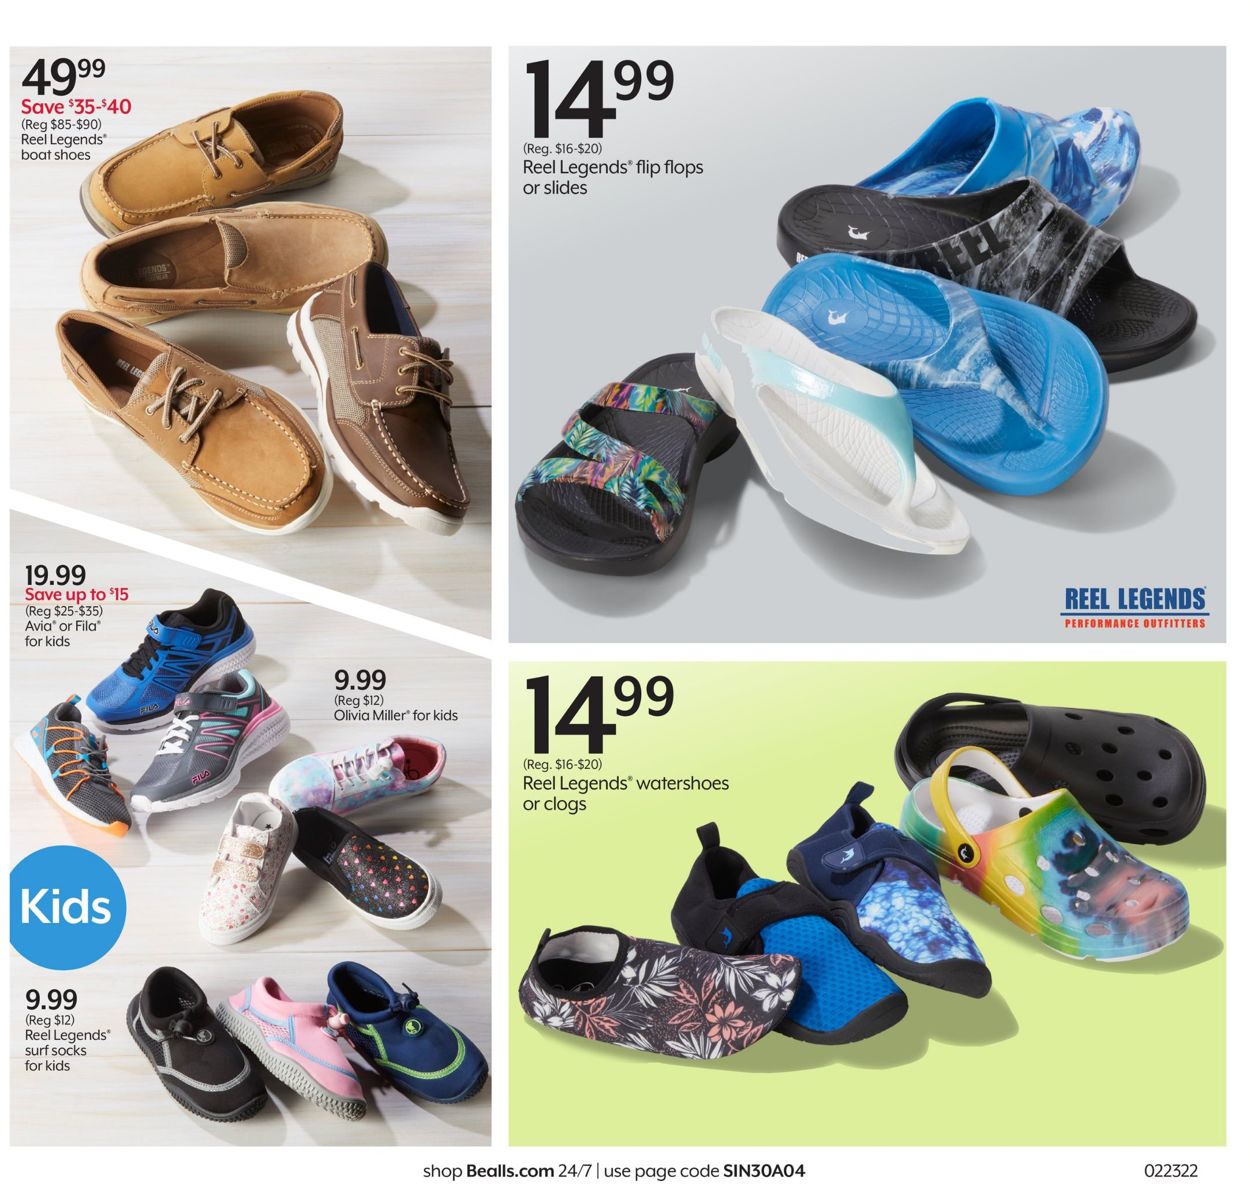 Bealls Florida Current weekly ad 02/23 - 03/01/2022 [4] - frequent-ads.com